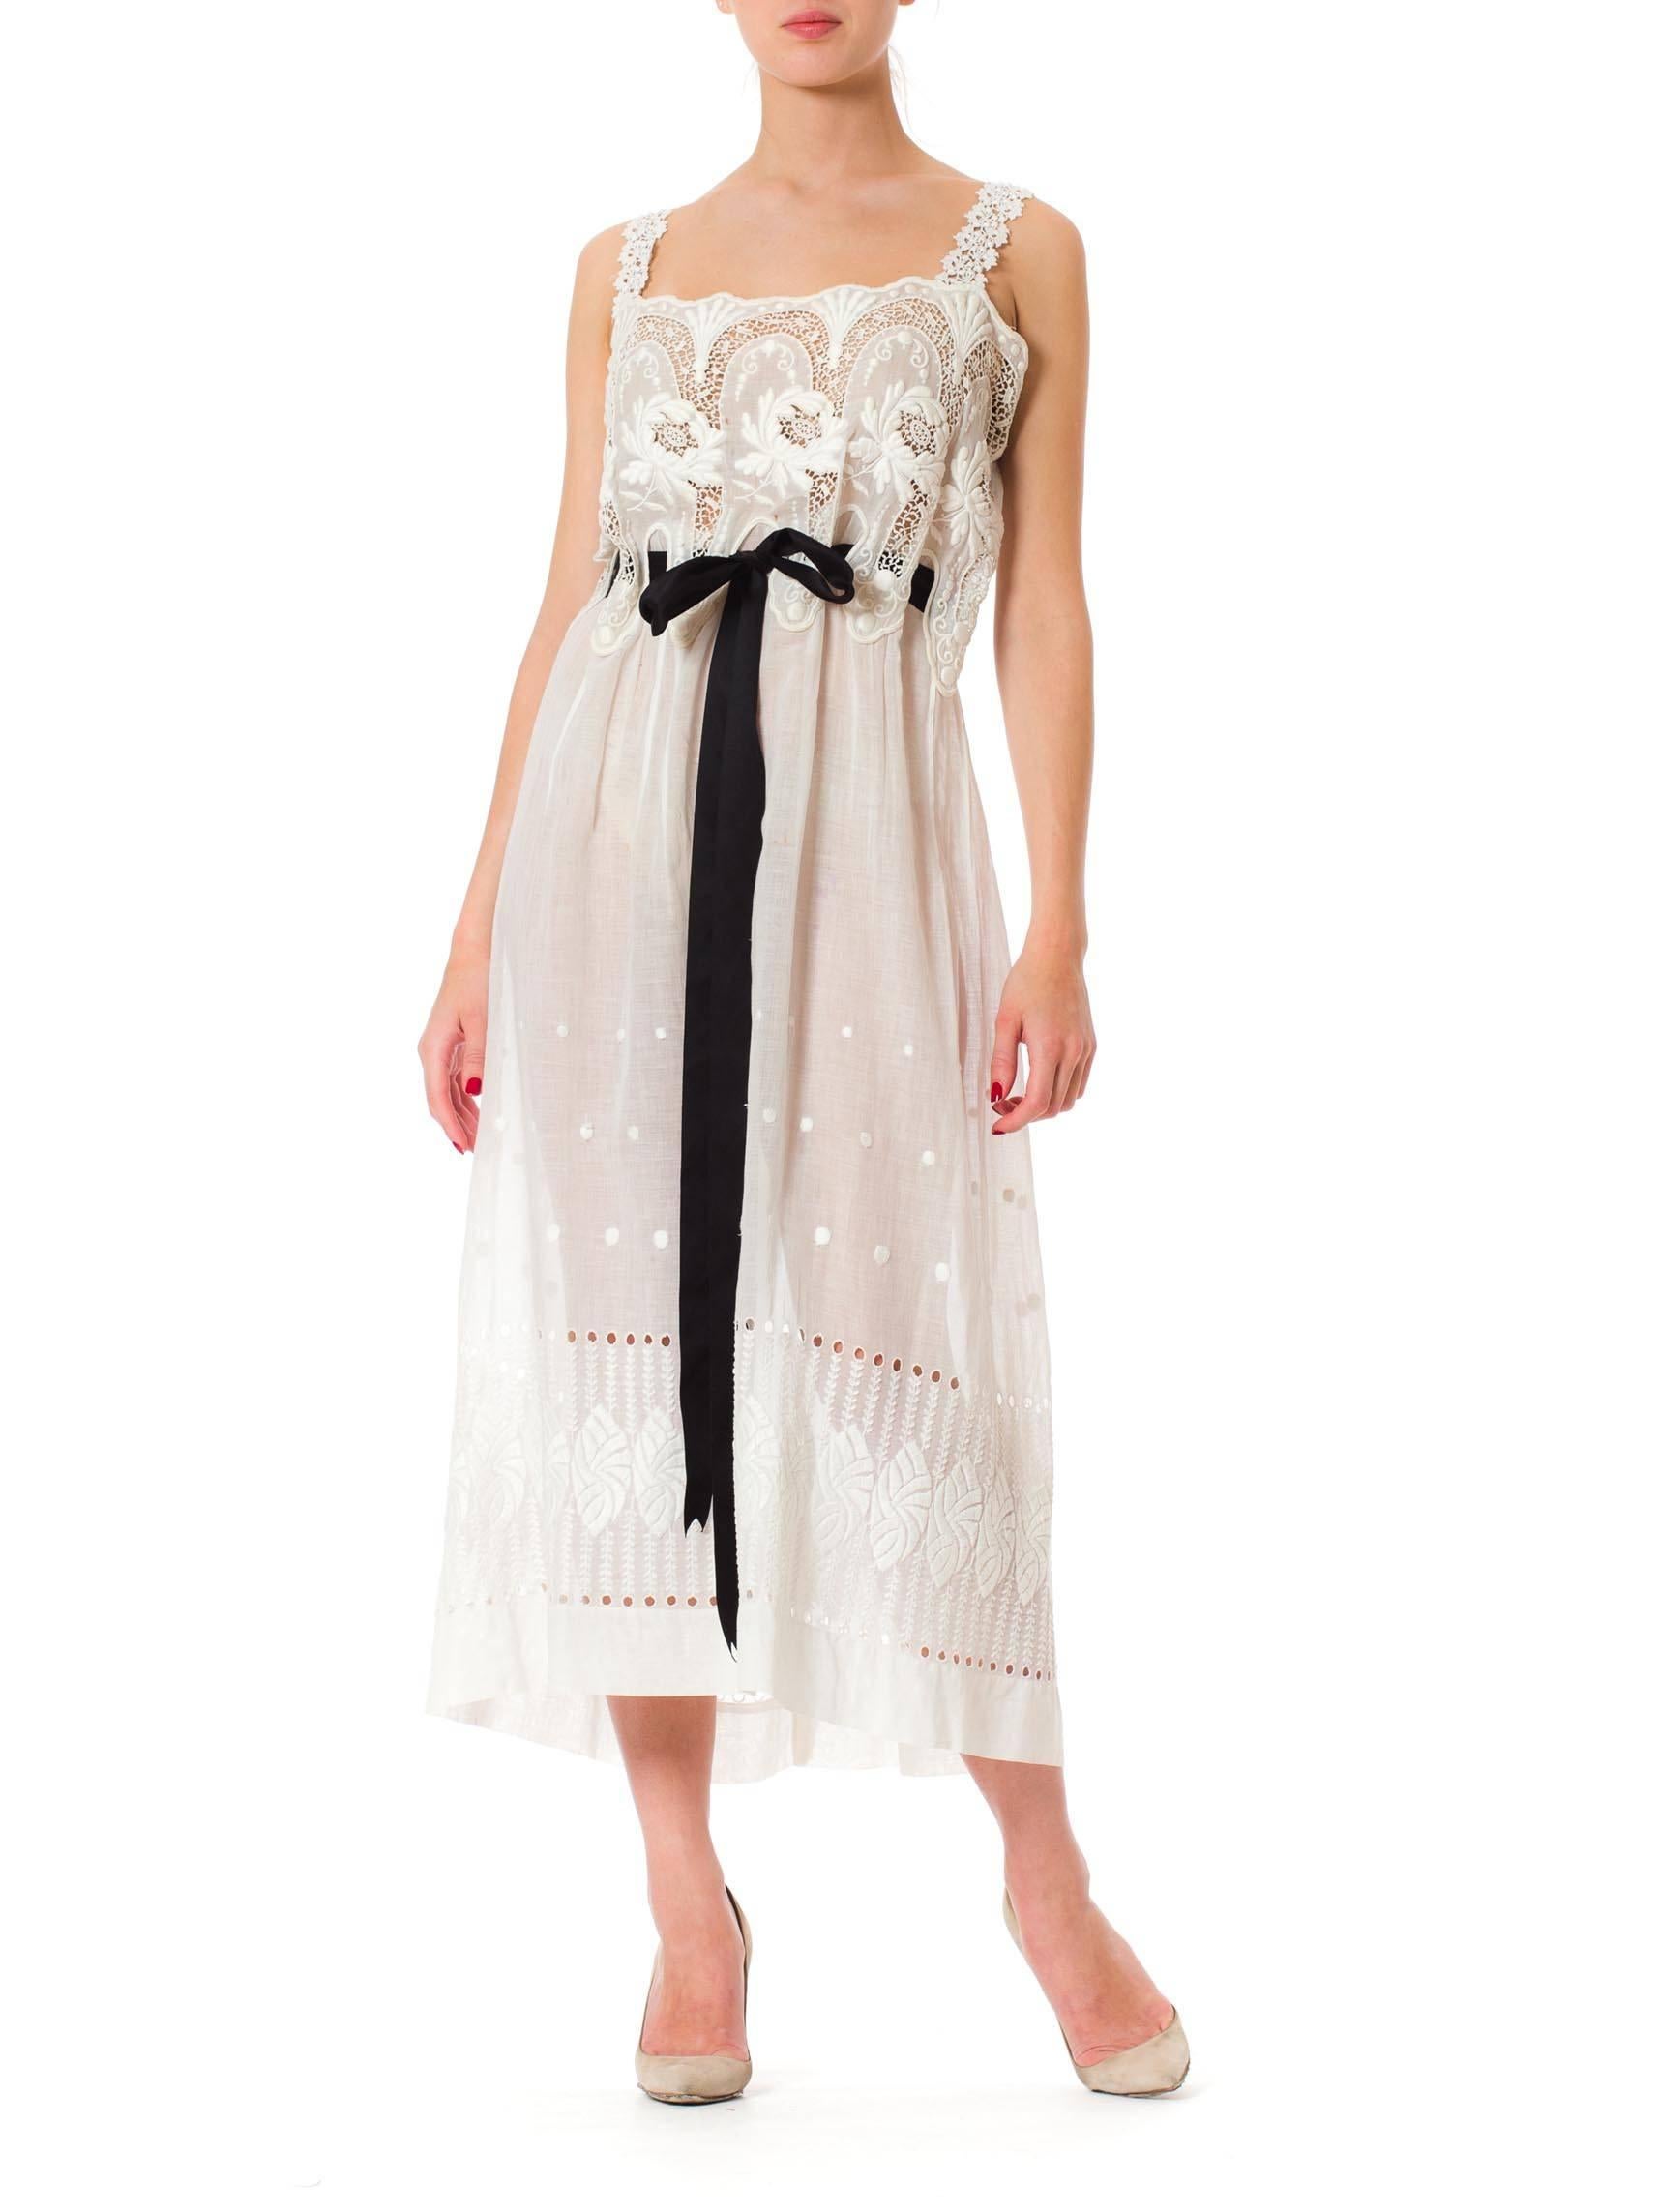 Gray MORPHEW COLLECTION White Victorian Cotton Voile Dress With Lace Details & Black